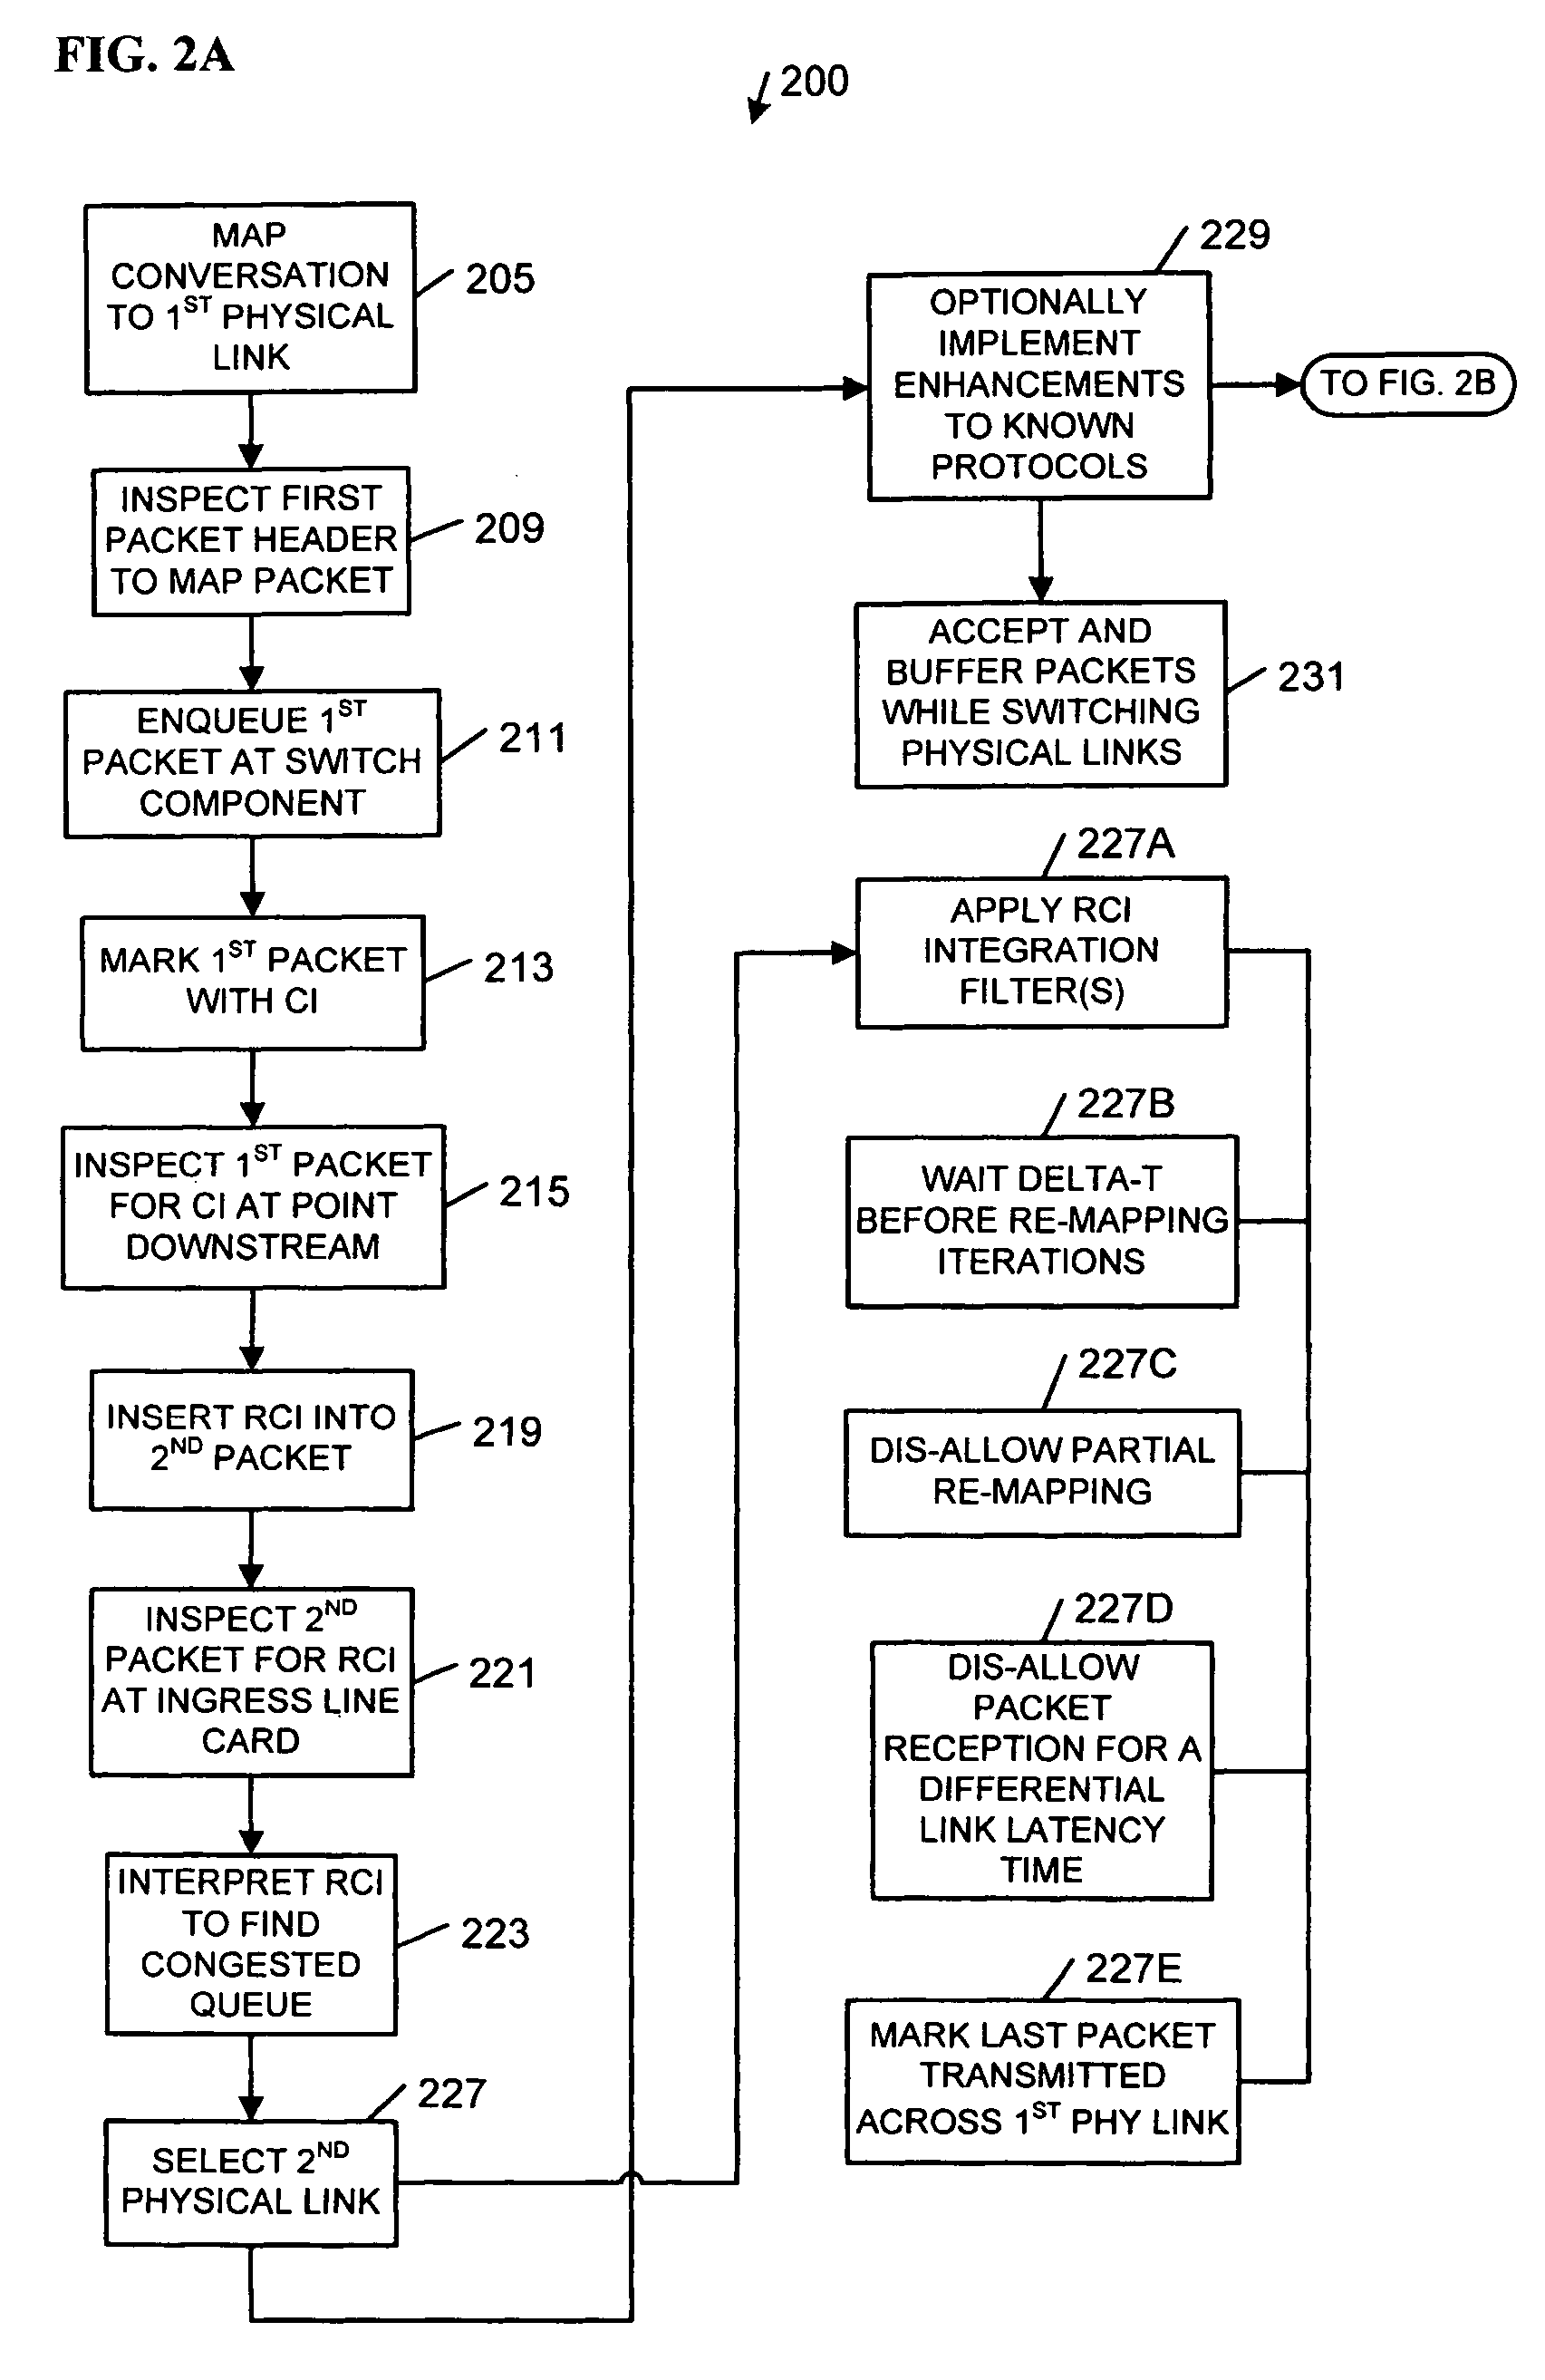 Network load balancing apparatus, systems, and methods